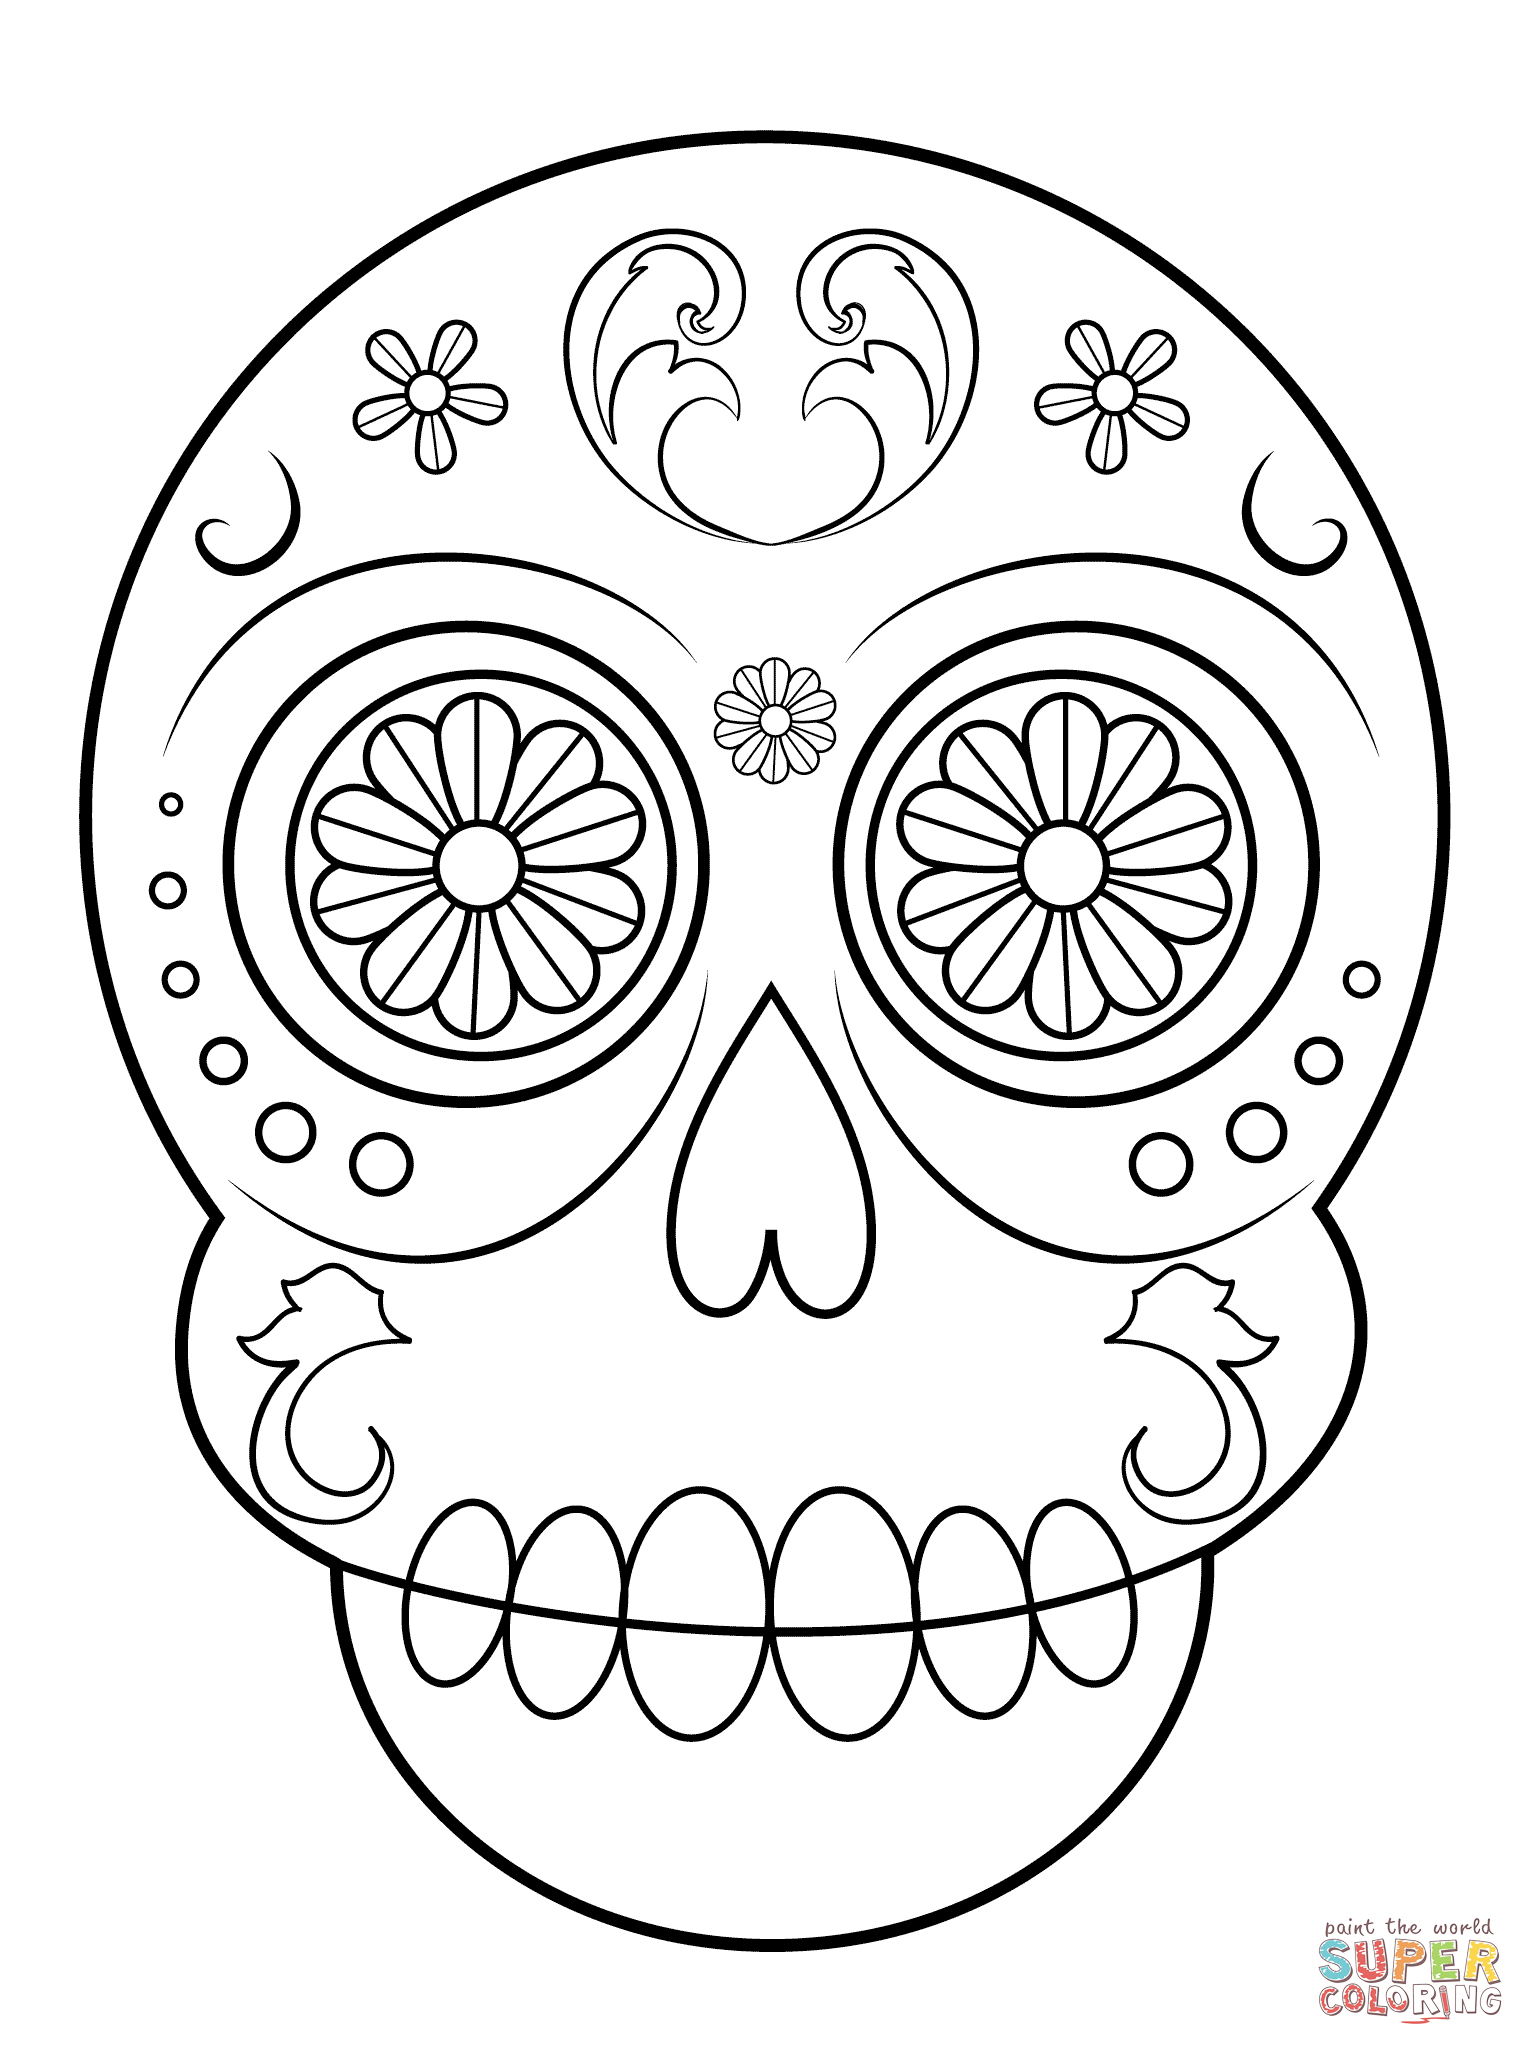 Simple Sugar Skull Coloring Page | Free Printable Coloring Pages - Free Printable Sugar Skull Coloring Pages